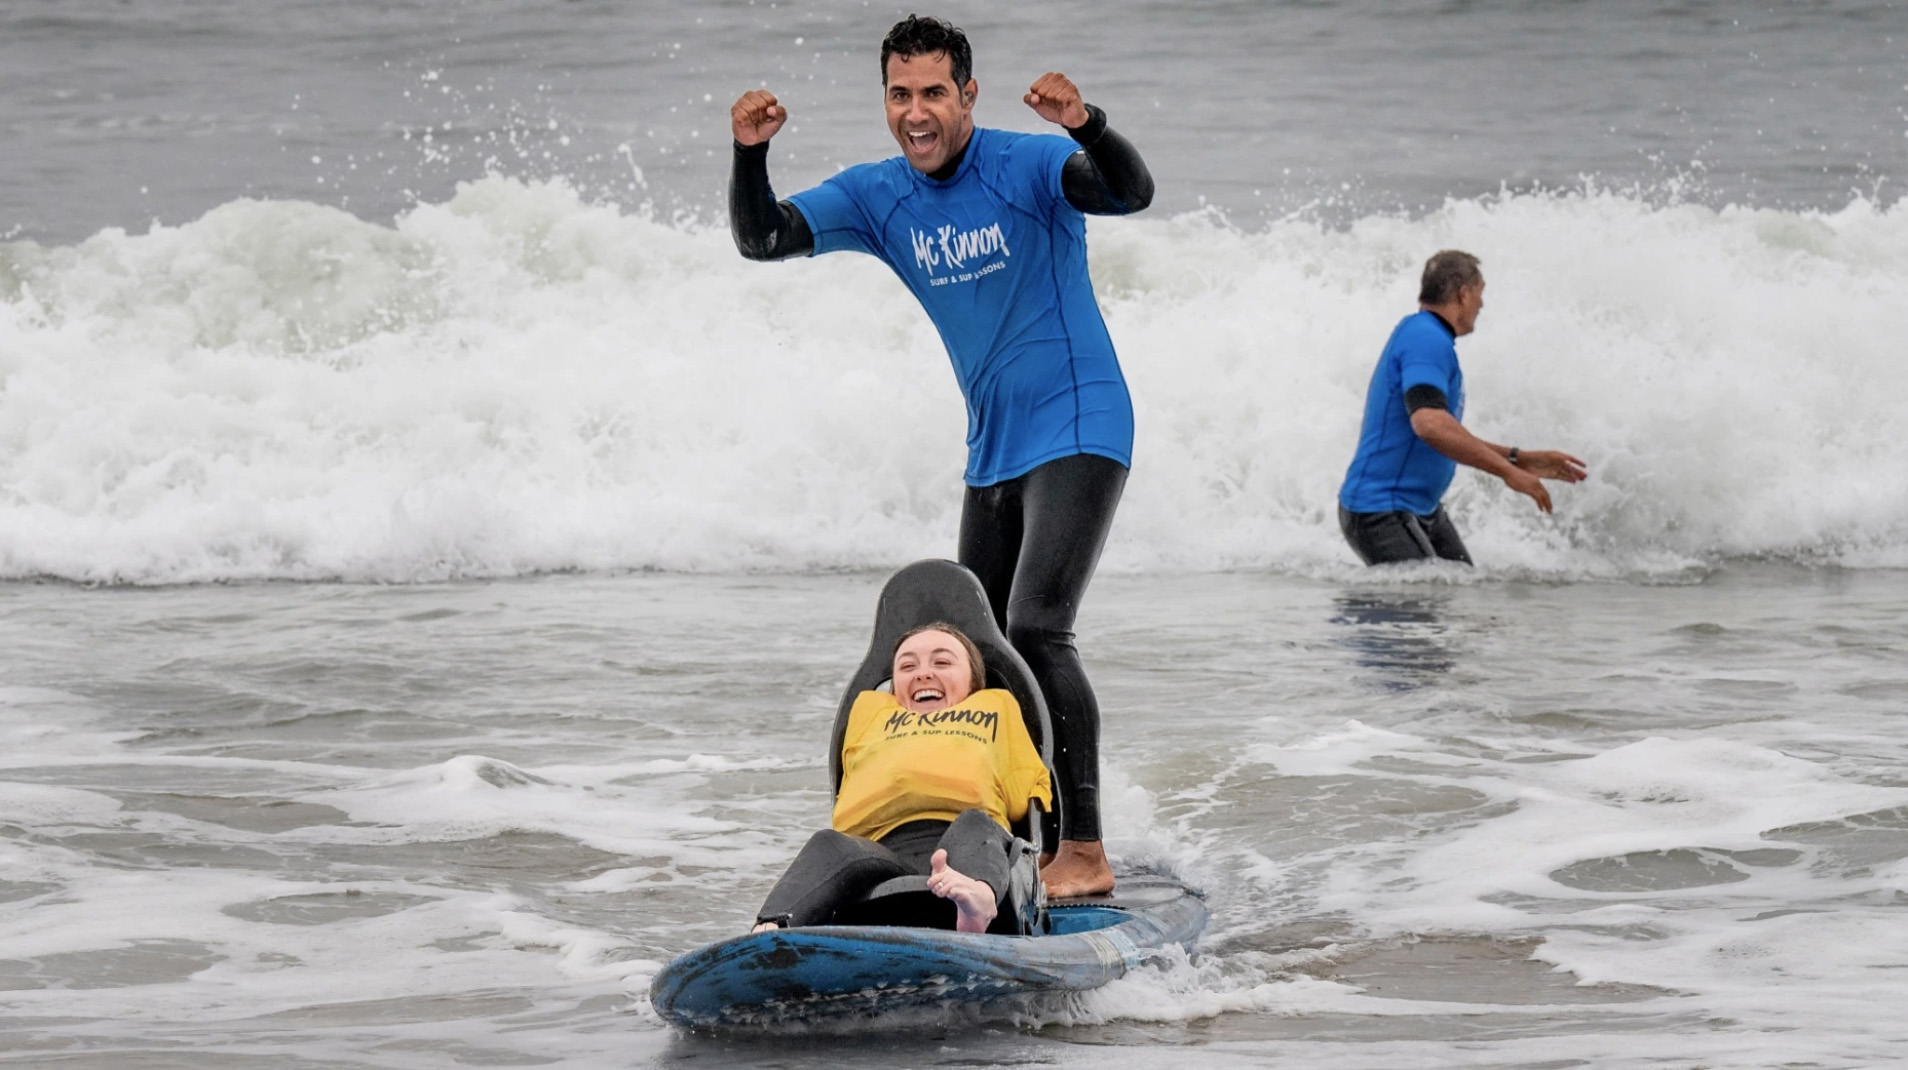 Emily Rowley, 20 takes a ride on a 15-foot chair board designed for adaptive surfing in Huntington Beach, CA on Friday, October 22, 2021. The board was developed by Rocky McKinnon, who runs McKinnon Surf & SUP Lessons. (Photo by Paul Bersebach, Orange County Register/SCNG)